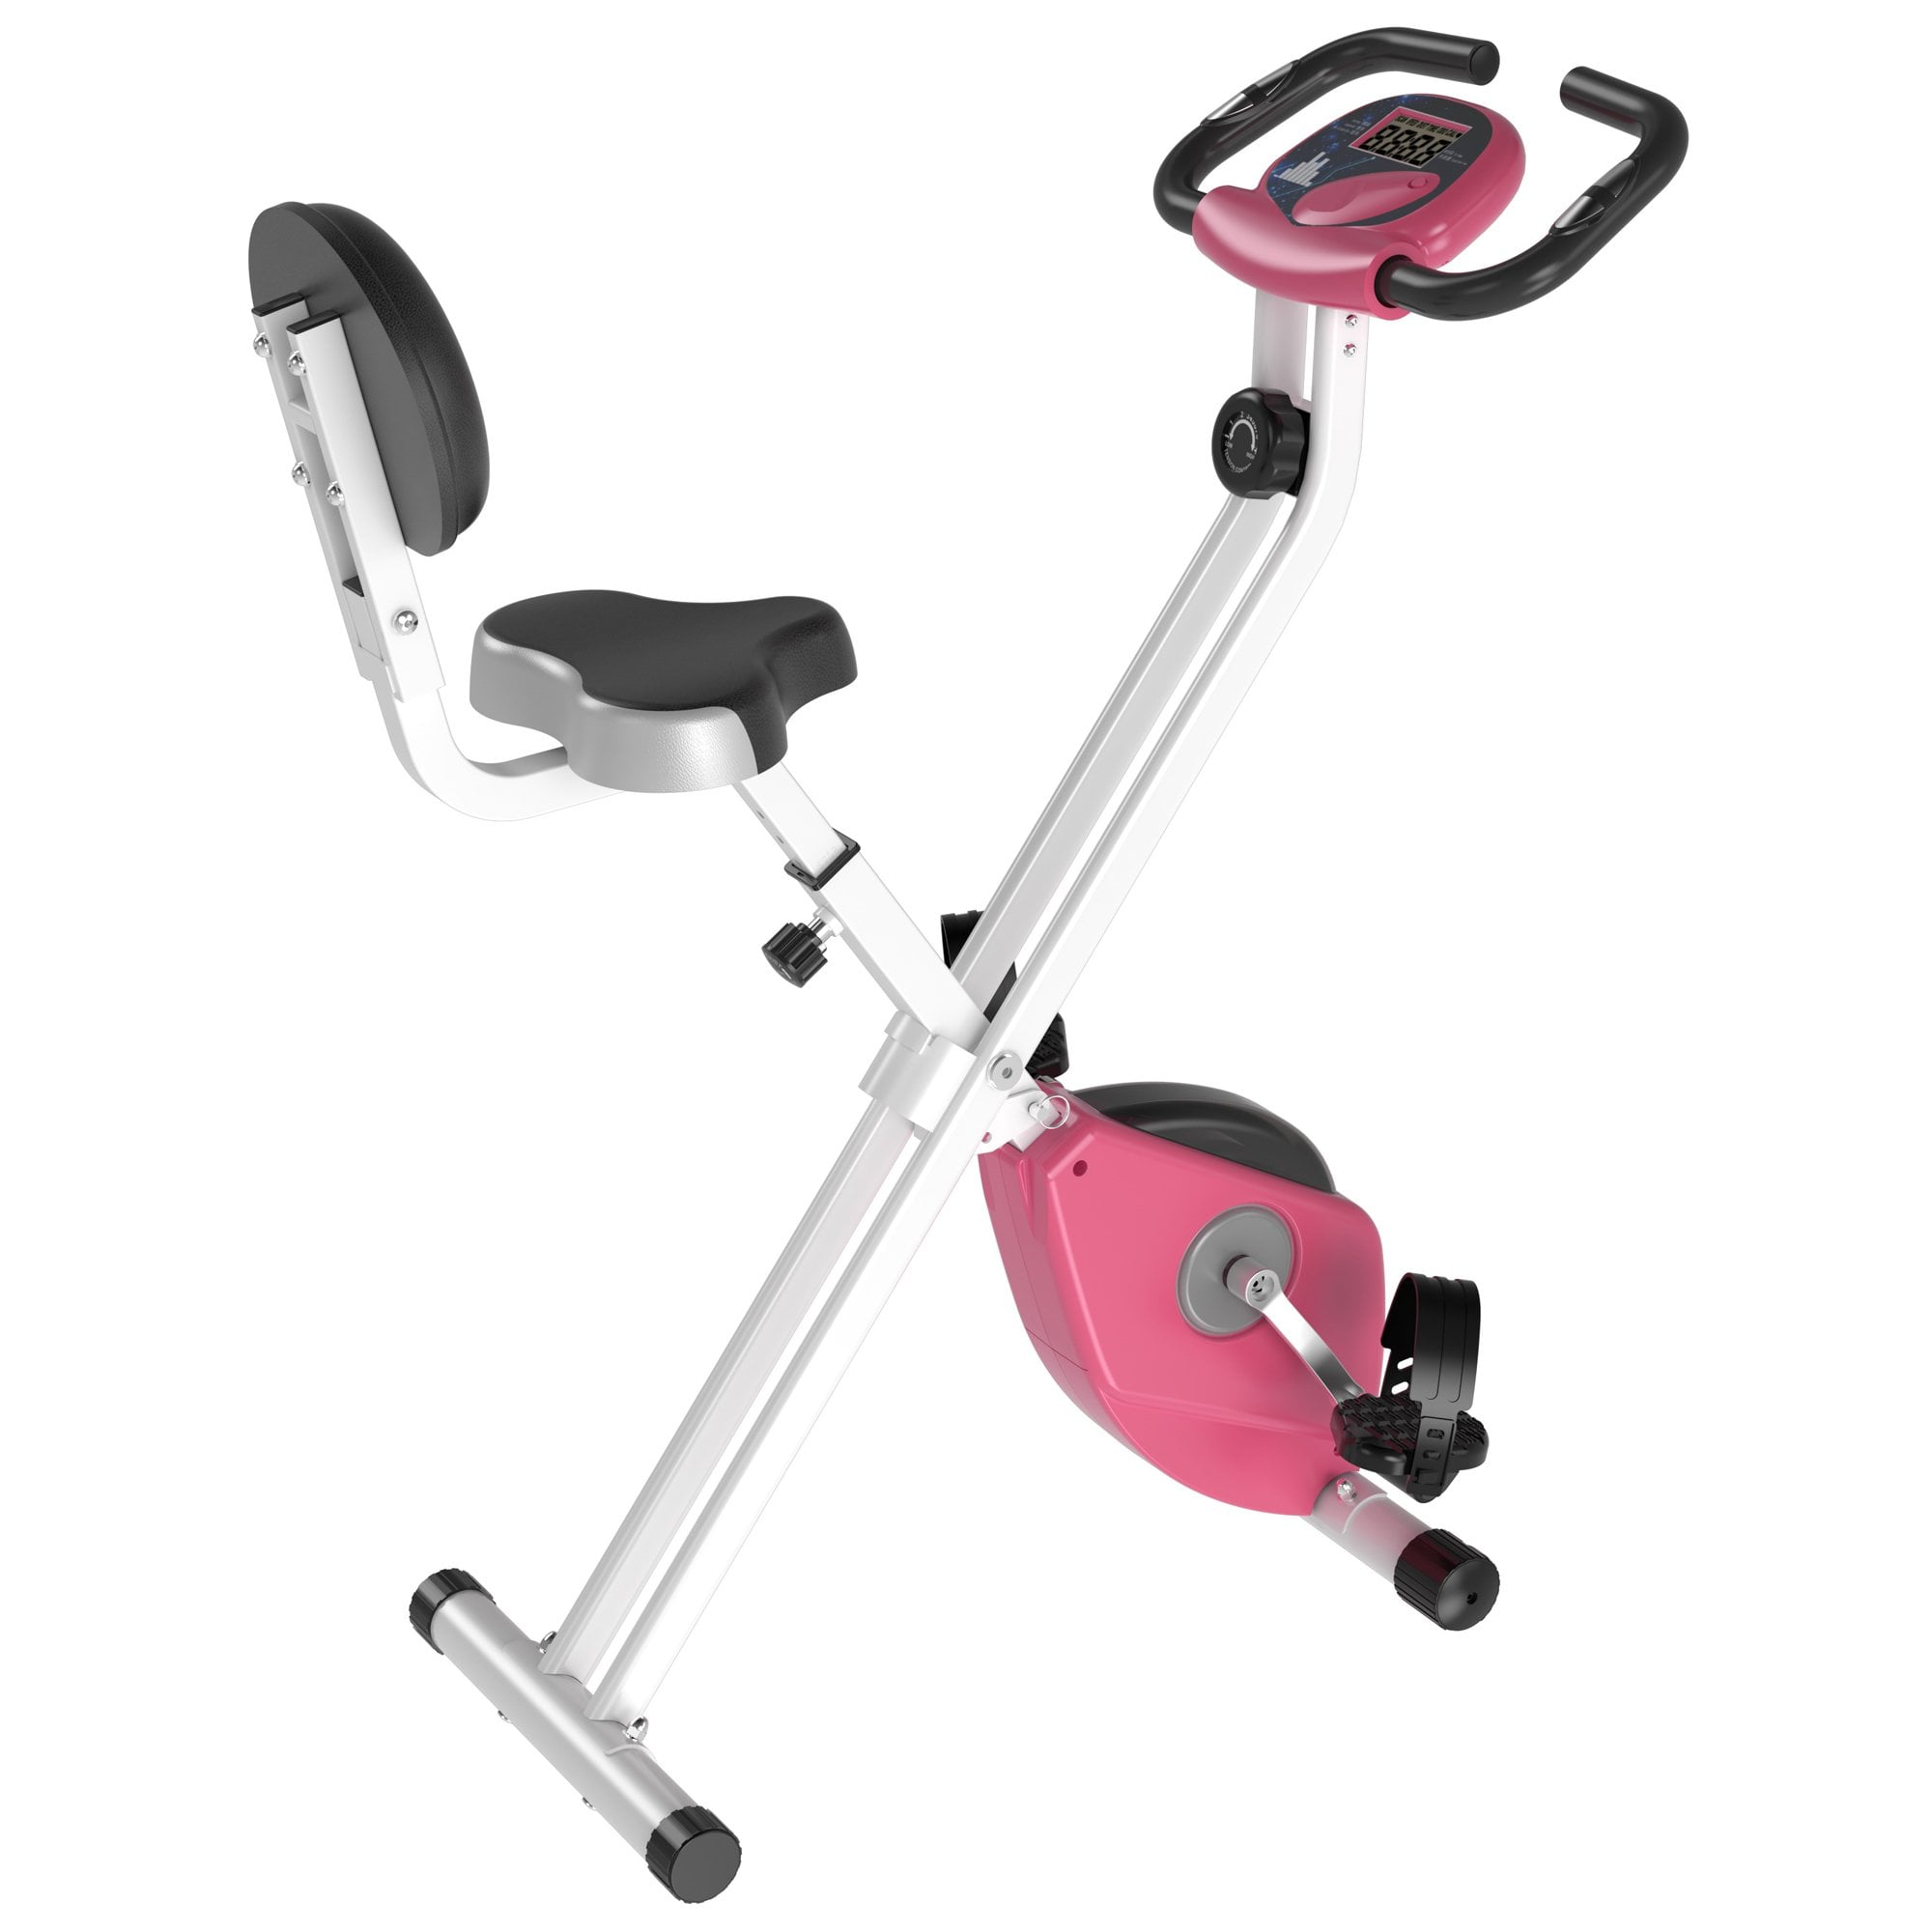 Magnetic Resistance Exercise Bike Foldable w/ LCD Monitor Adjustable Seat Heart Rate Monitors Food Straps Foot Pads Home Office Fitness Training Worko